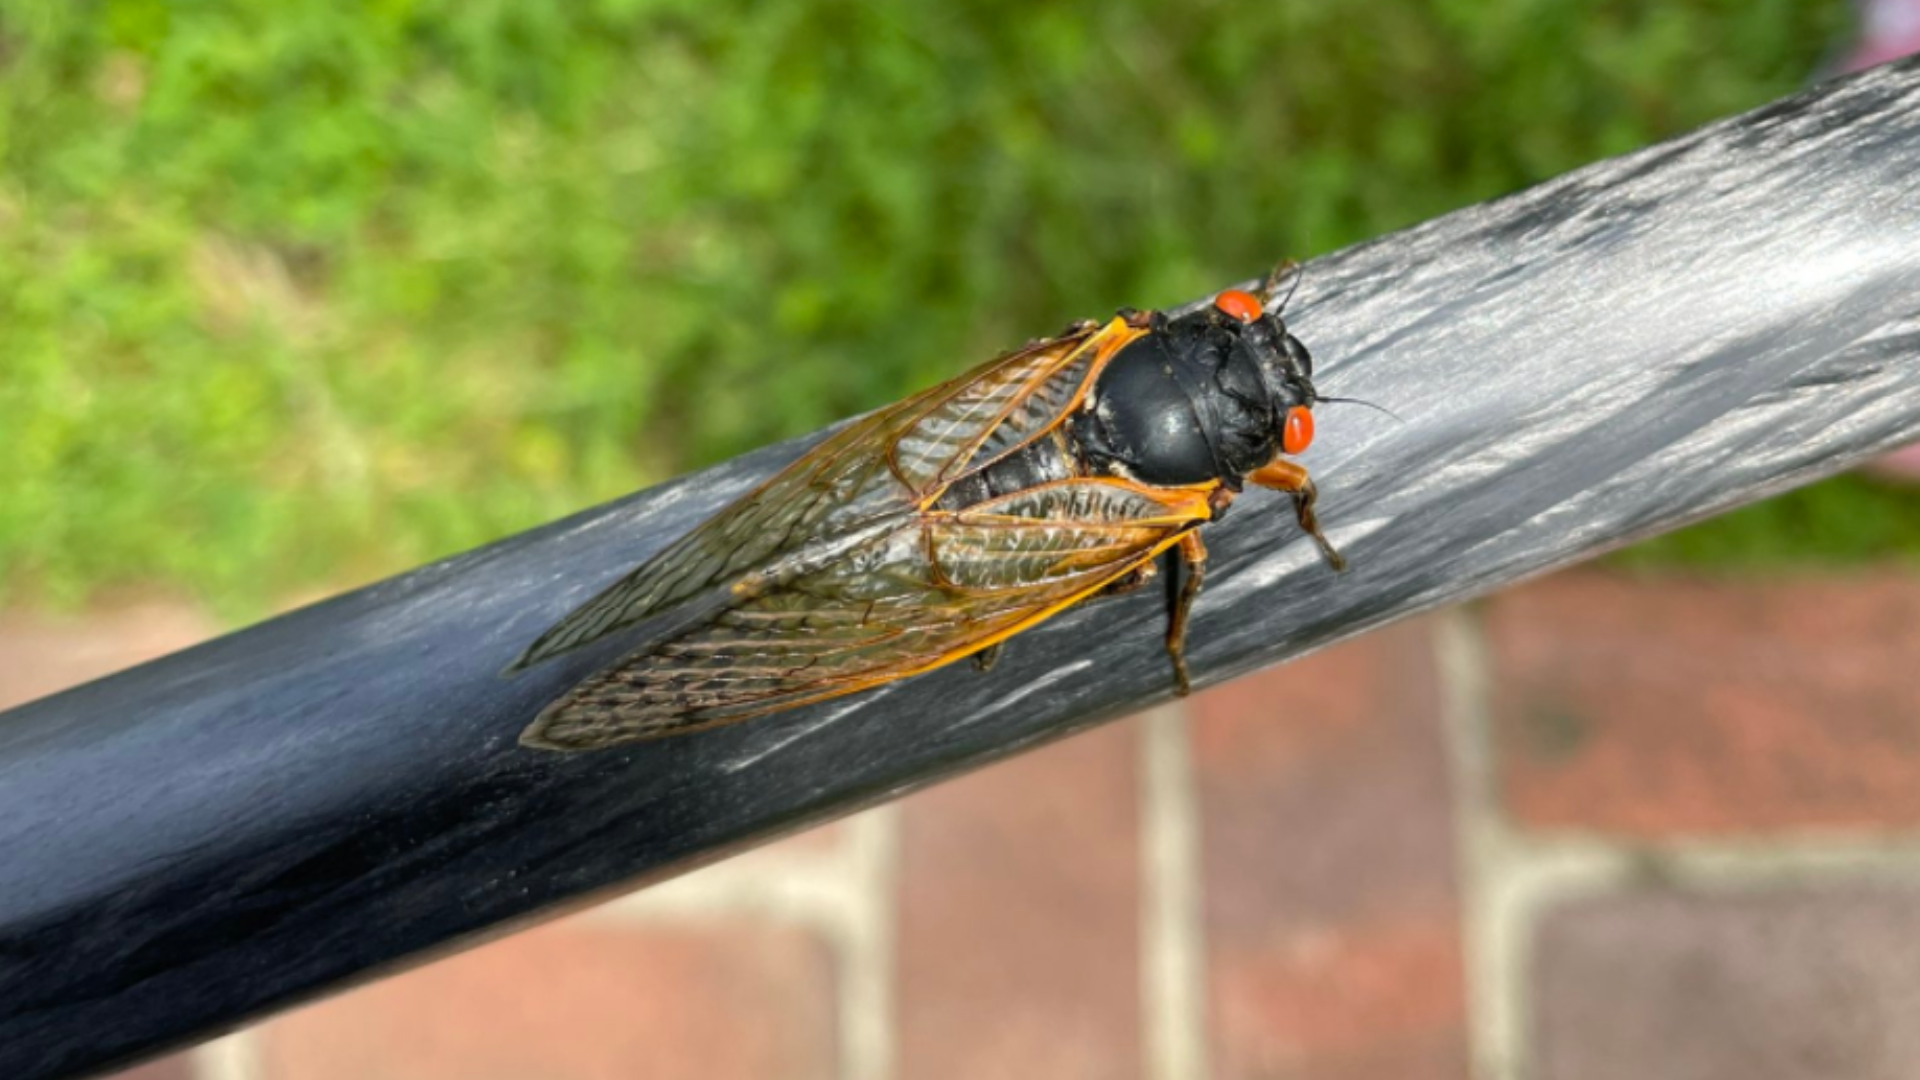 Why do some backyards have dozens of cicadas, whereas others might not just blocks away. The Verify team looked into it.